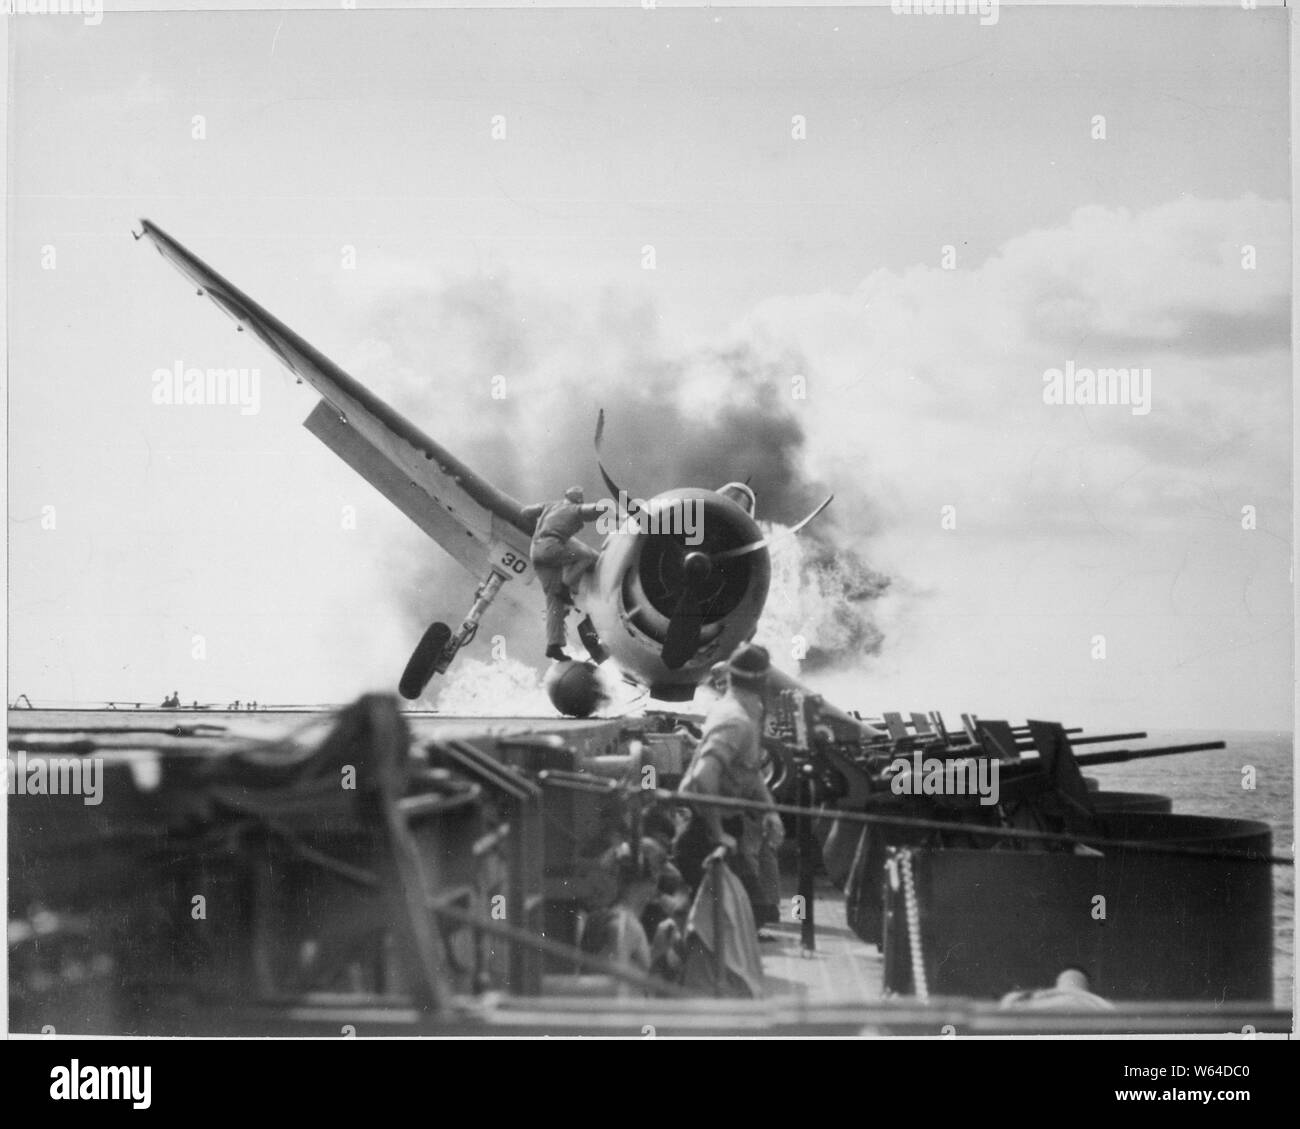 Crash landing of F6F on flight deck of USS ENTERPRISE while enroute to attack Makin Island. Lieutenant Walter Chewning, catapult officer, clambering up the side of the plane to assist pilot, Ens. Byron Johnson, from the flaming cockpit.; General notes:  Use War and Conflict Number 964 when ordering a reproduction or requesting information about this image. Stock Photo